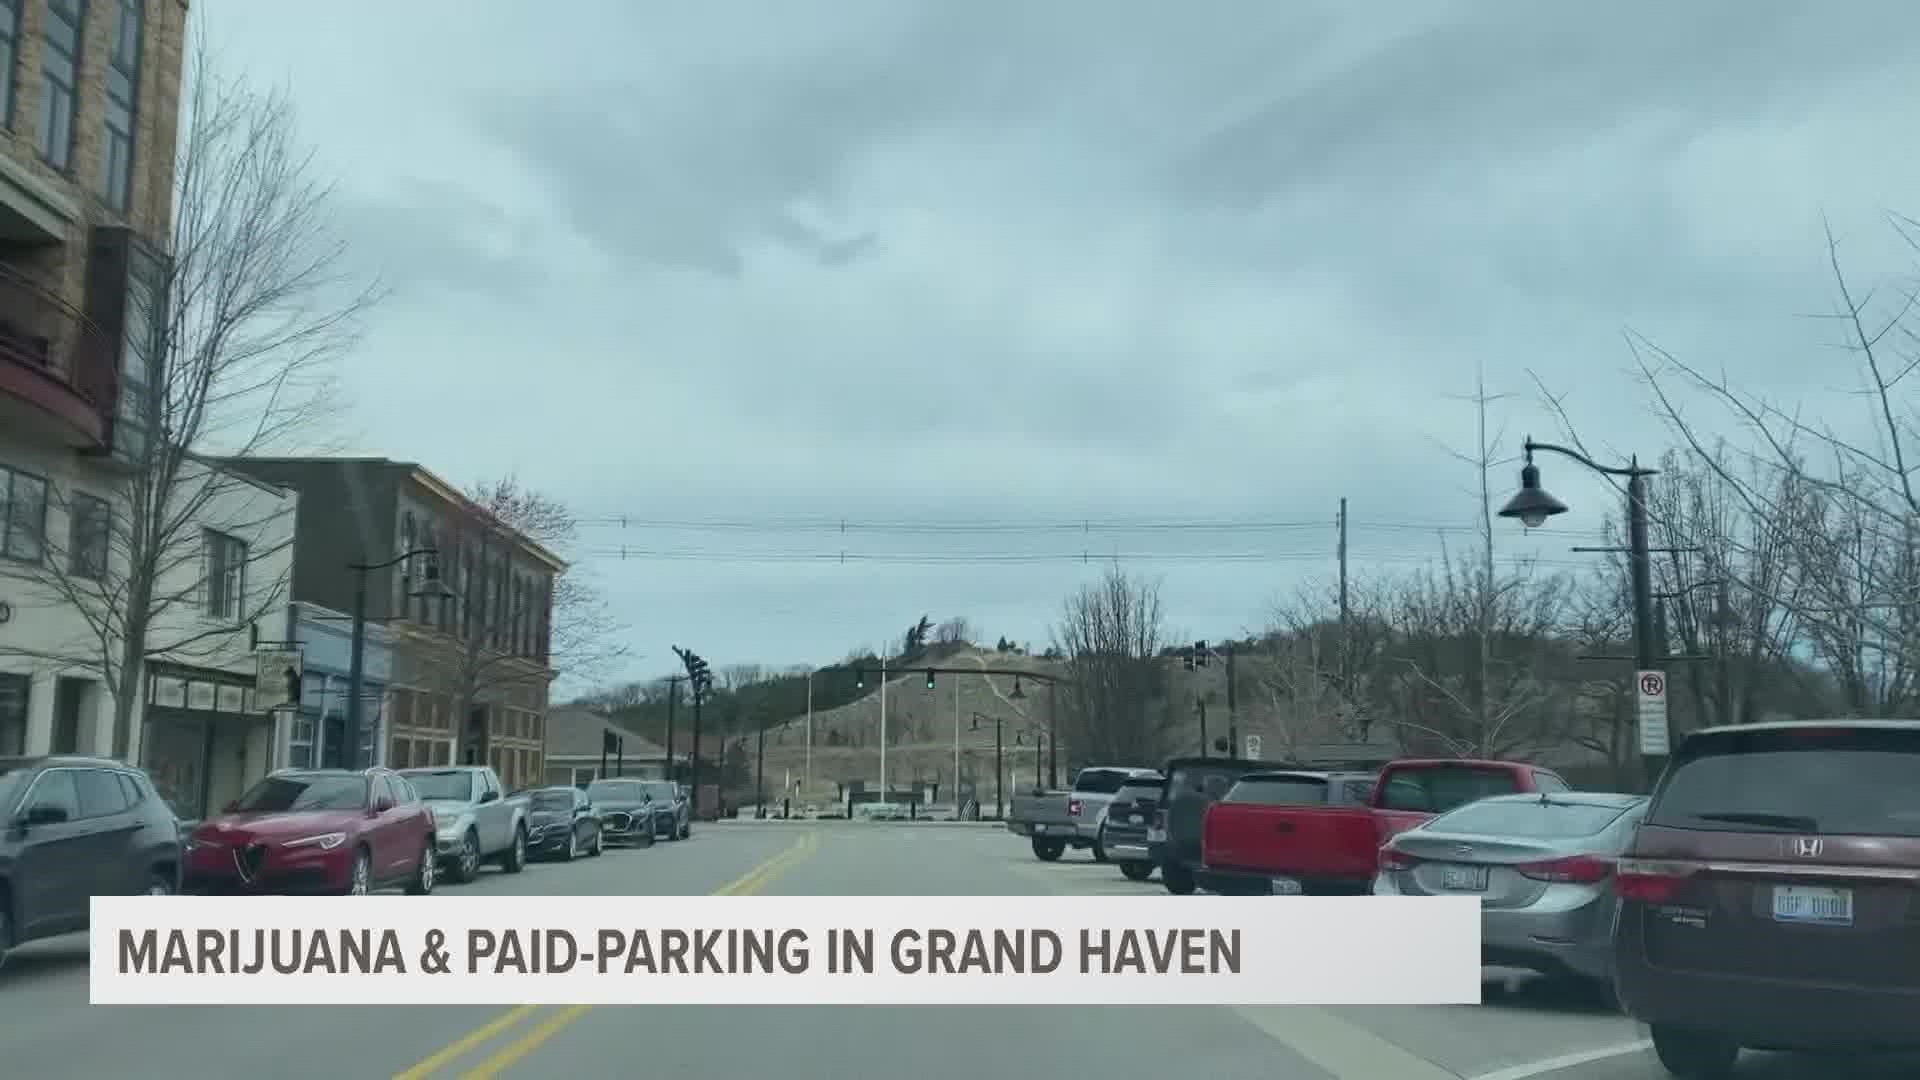 Natives of Grand Haven continue to voice mixed opinions on the city's plan to enforce paid parking.